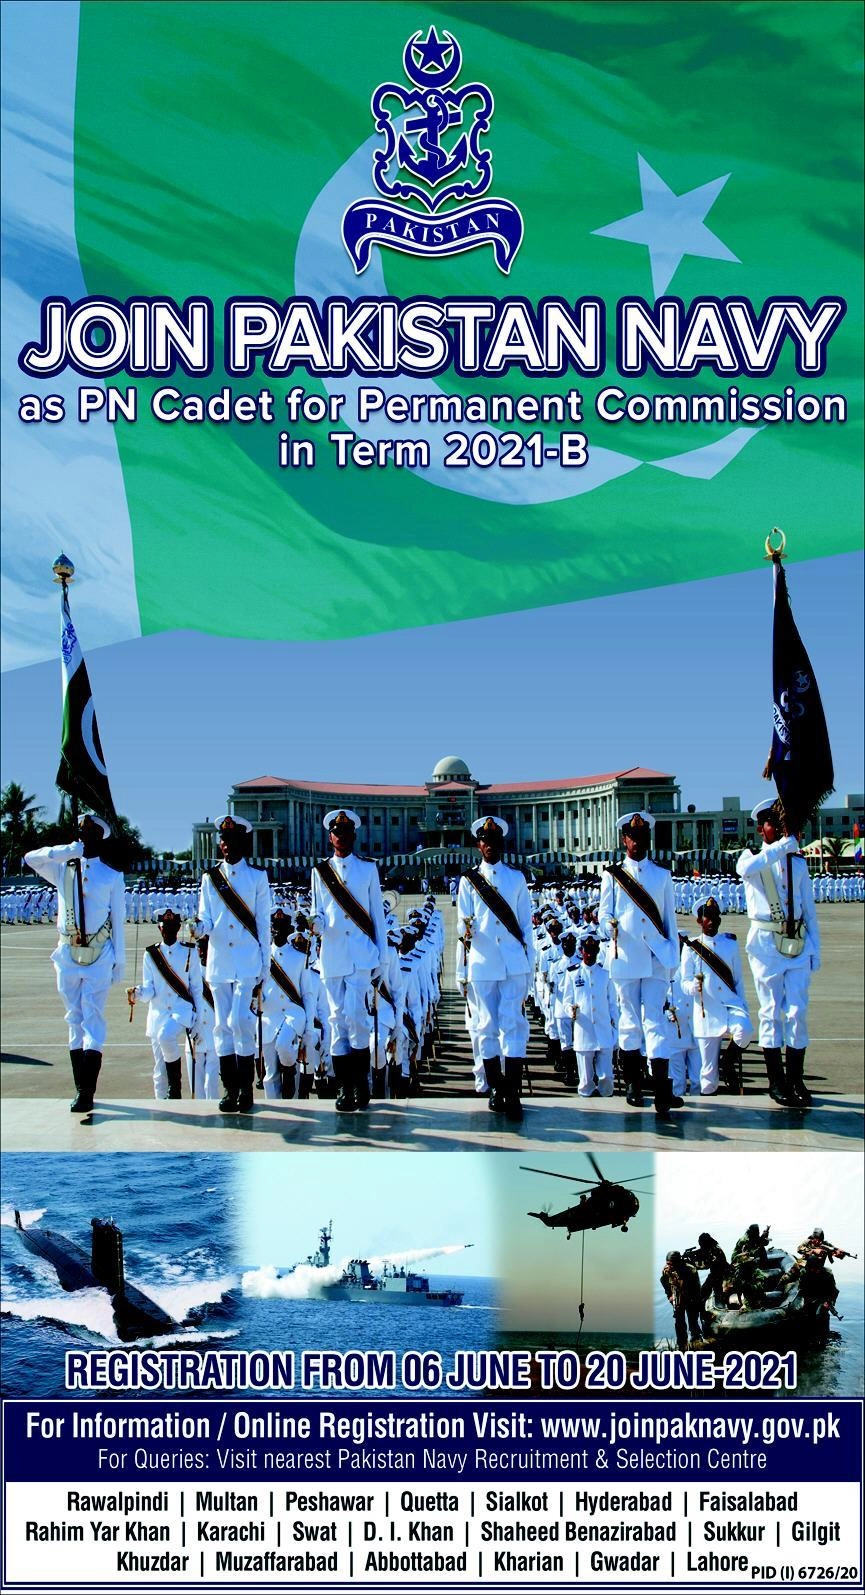 Join Pak Navy Jobs as PN Cadet for Permanent Commission B-2021